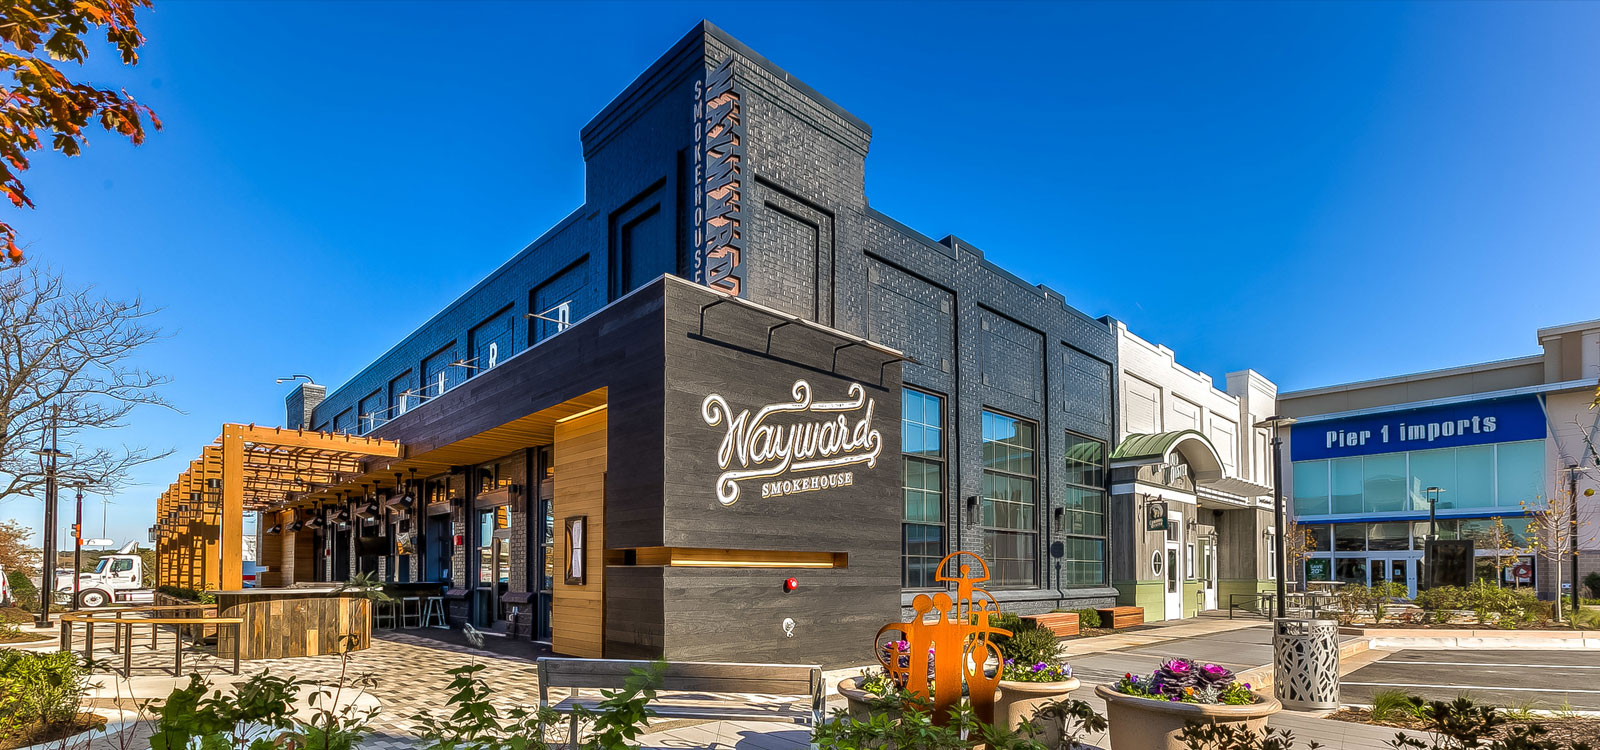 Wayward Smokehouse and Curious Oyster Restaurants, The Avenue at White Marsh, commercial renovation by UrbanBuilt